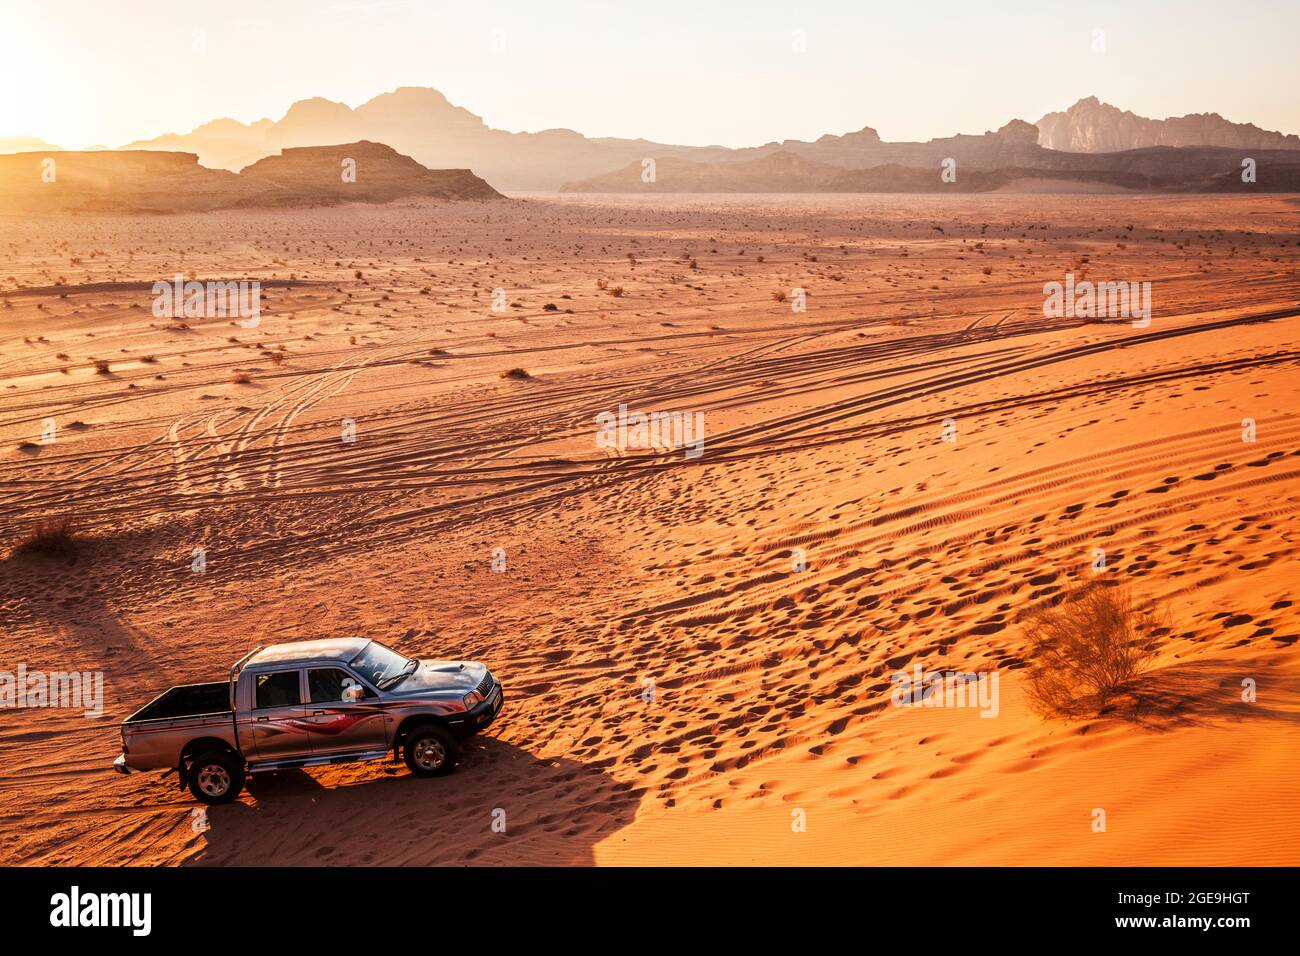 A Mitsubishi tourist jeep at sunset in the Jordanian desert at Wadi Rum or Valley of the Moon. Stock Photo